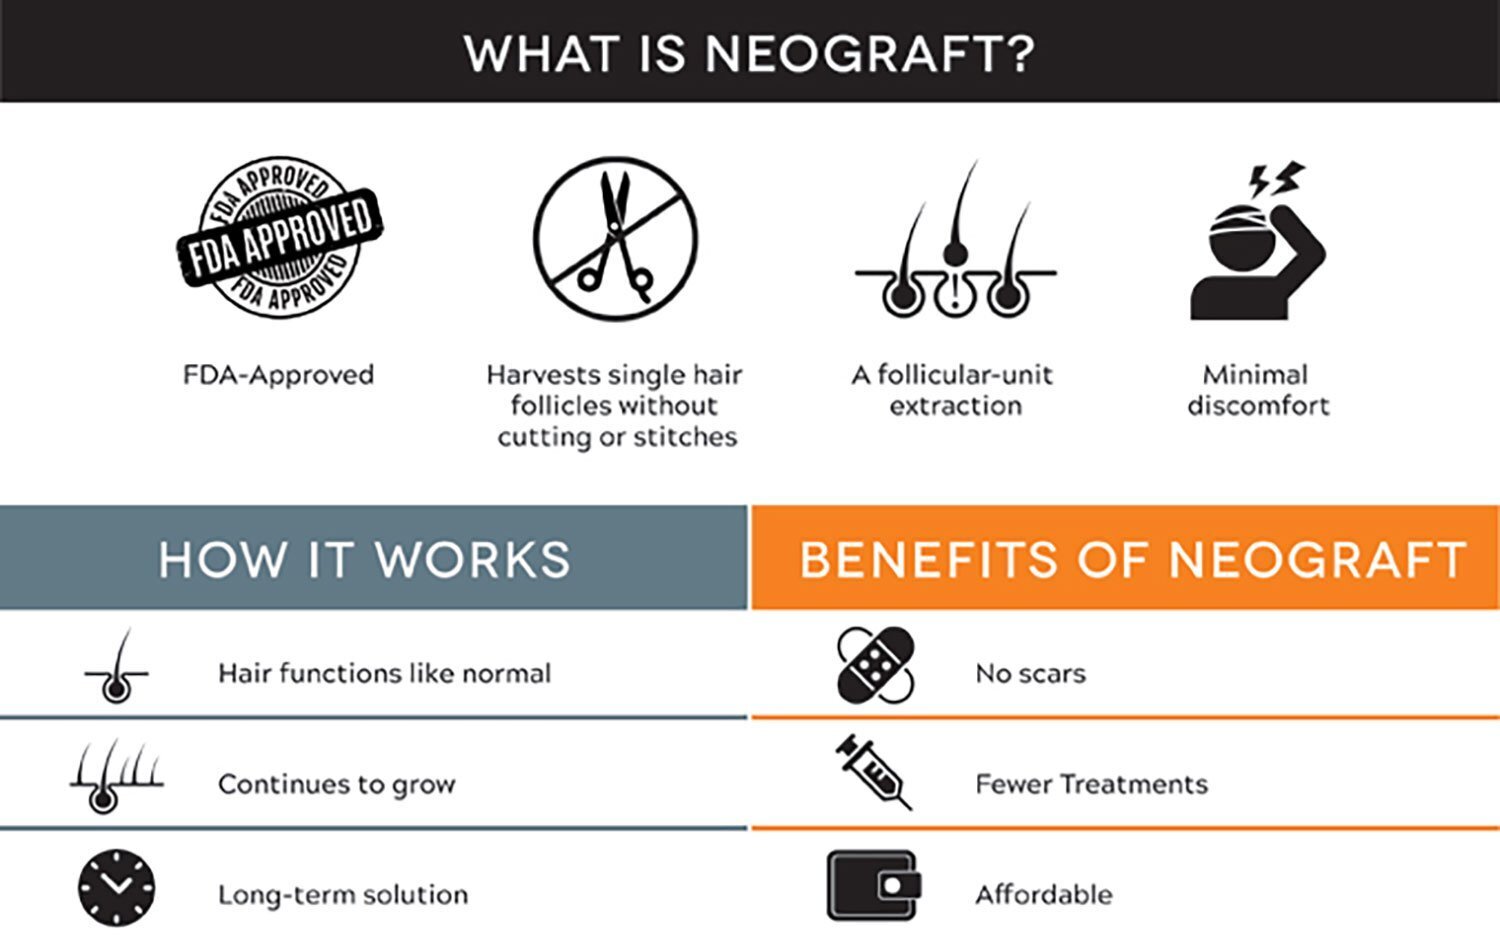 NeoGraft for Women Grand Rapids - What is NeoGraft? FDA Approved. Harvests single hair follicles without cutting or stitches. A fllicular-unit extraction. Minimal discomfort. How It Works. Hair functions like normal. Continues to Grow. Long-Term solution. Benefits of NeoGraft. No Scars. Fewer Treatments. Affordable.